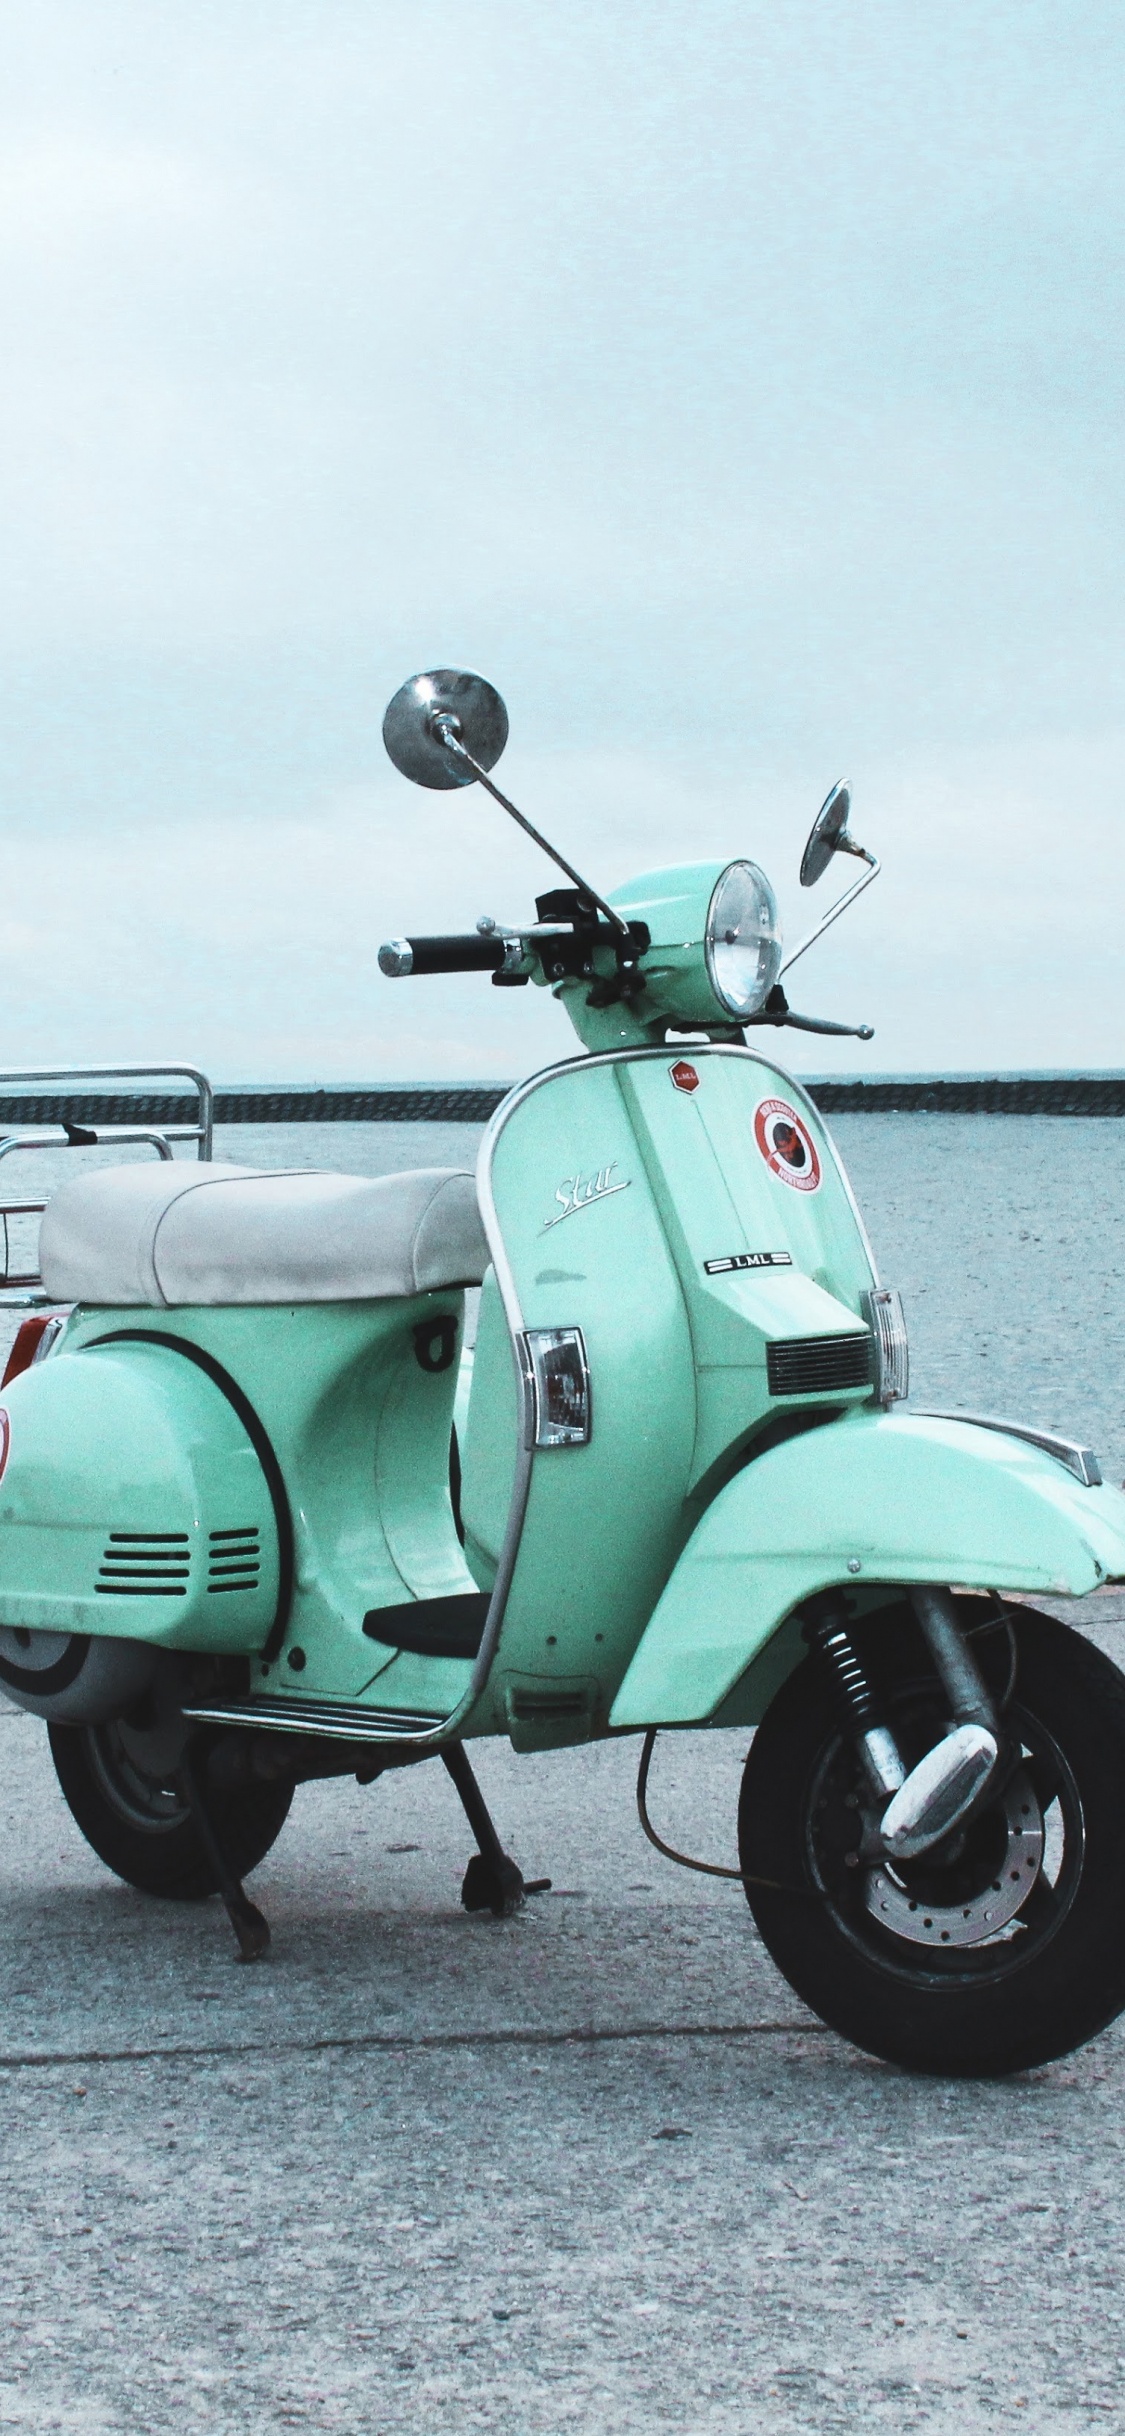 Green Motor Scooter Parked on Gray Concrete Pavement Near Body of Water During Daytime. Wallpaper in 1125x2436 Resolution